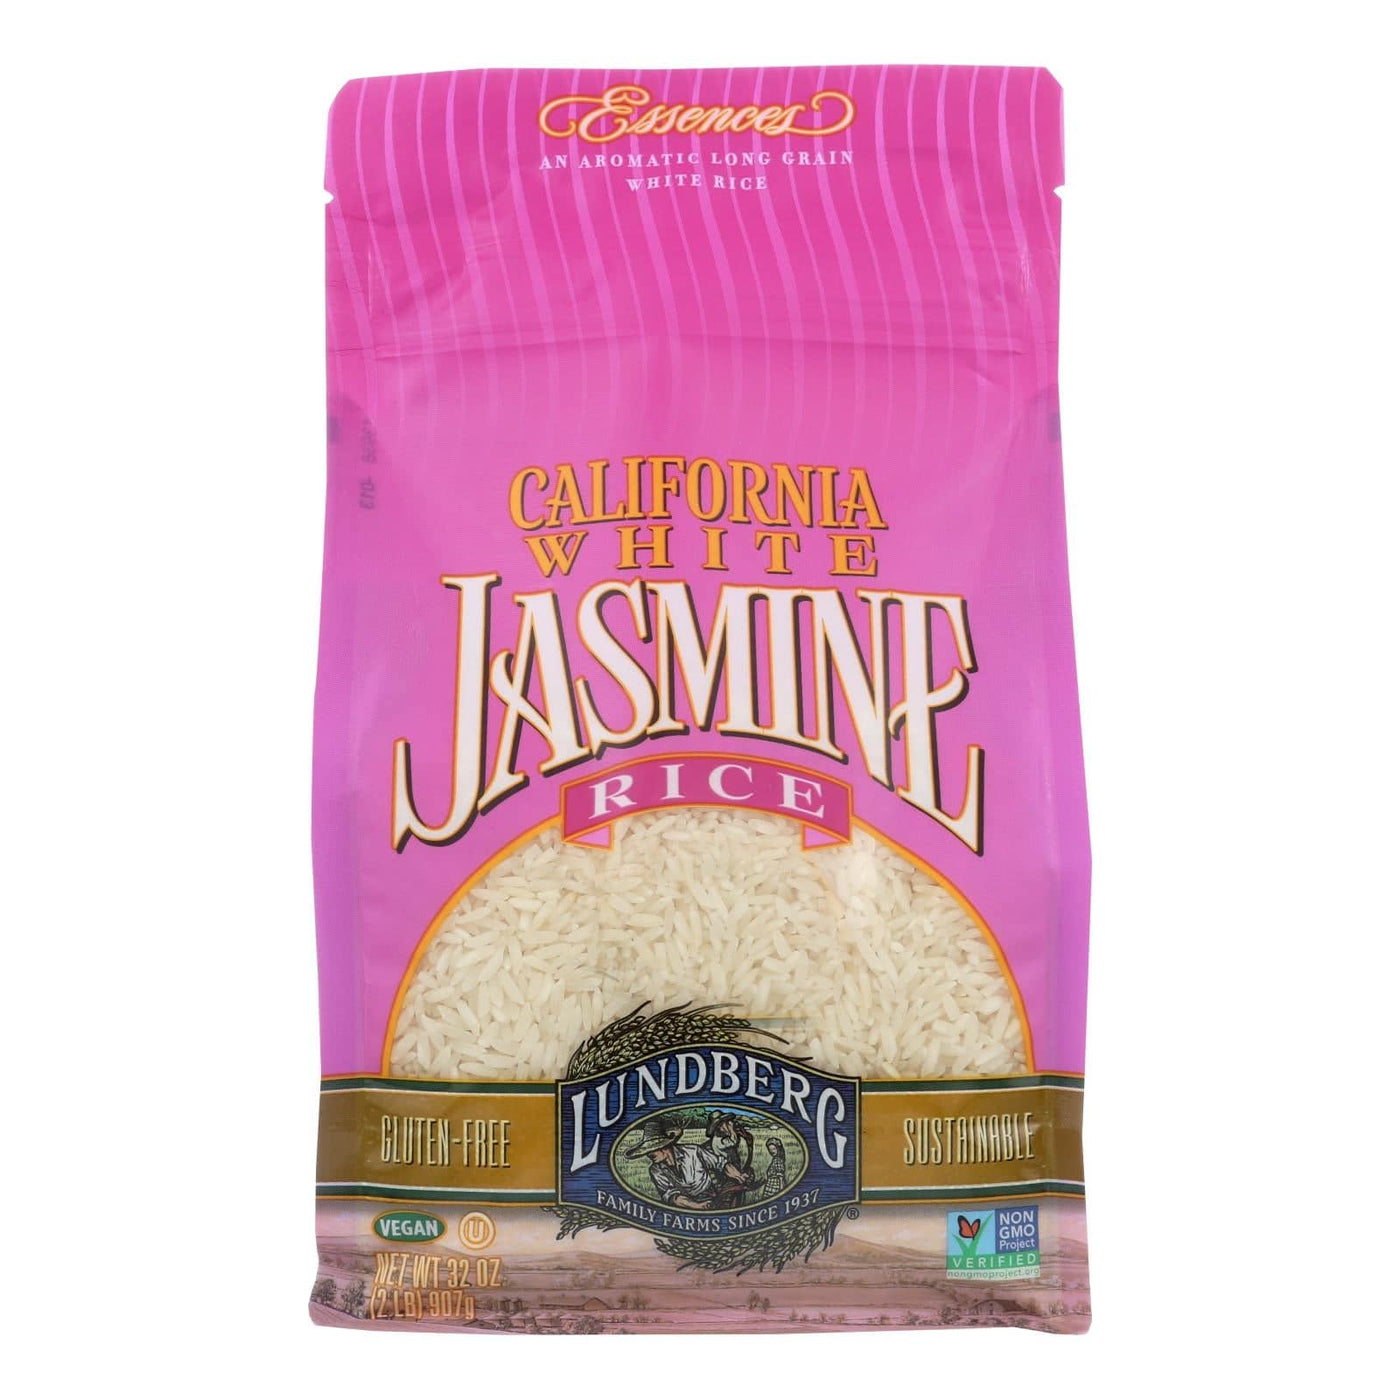 Buy Lundberg Family Farms White Jasmine Rice - Case Of 6 - 2 Lb.  at OnlyNaturals.us